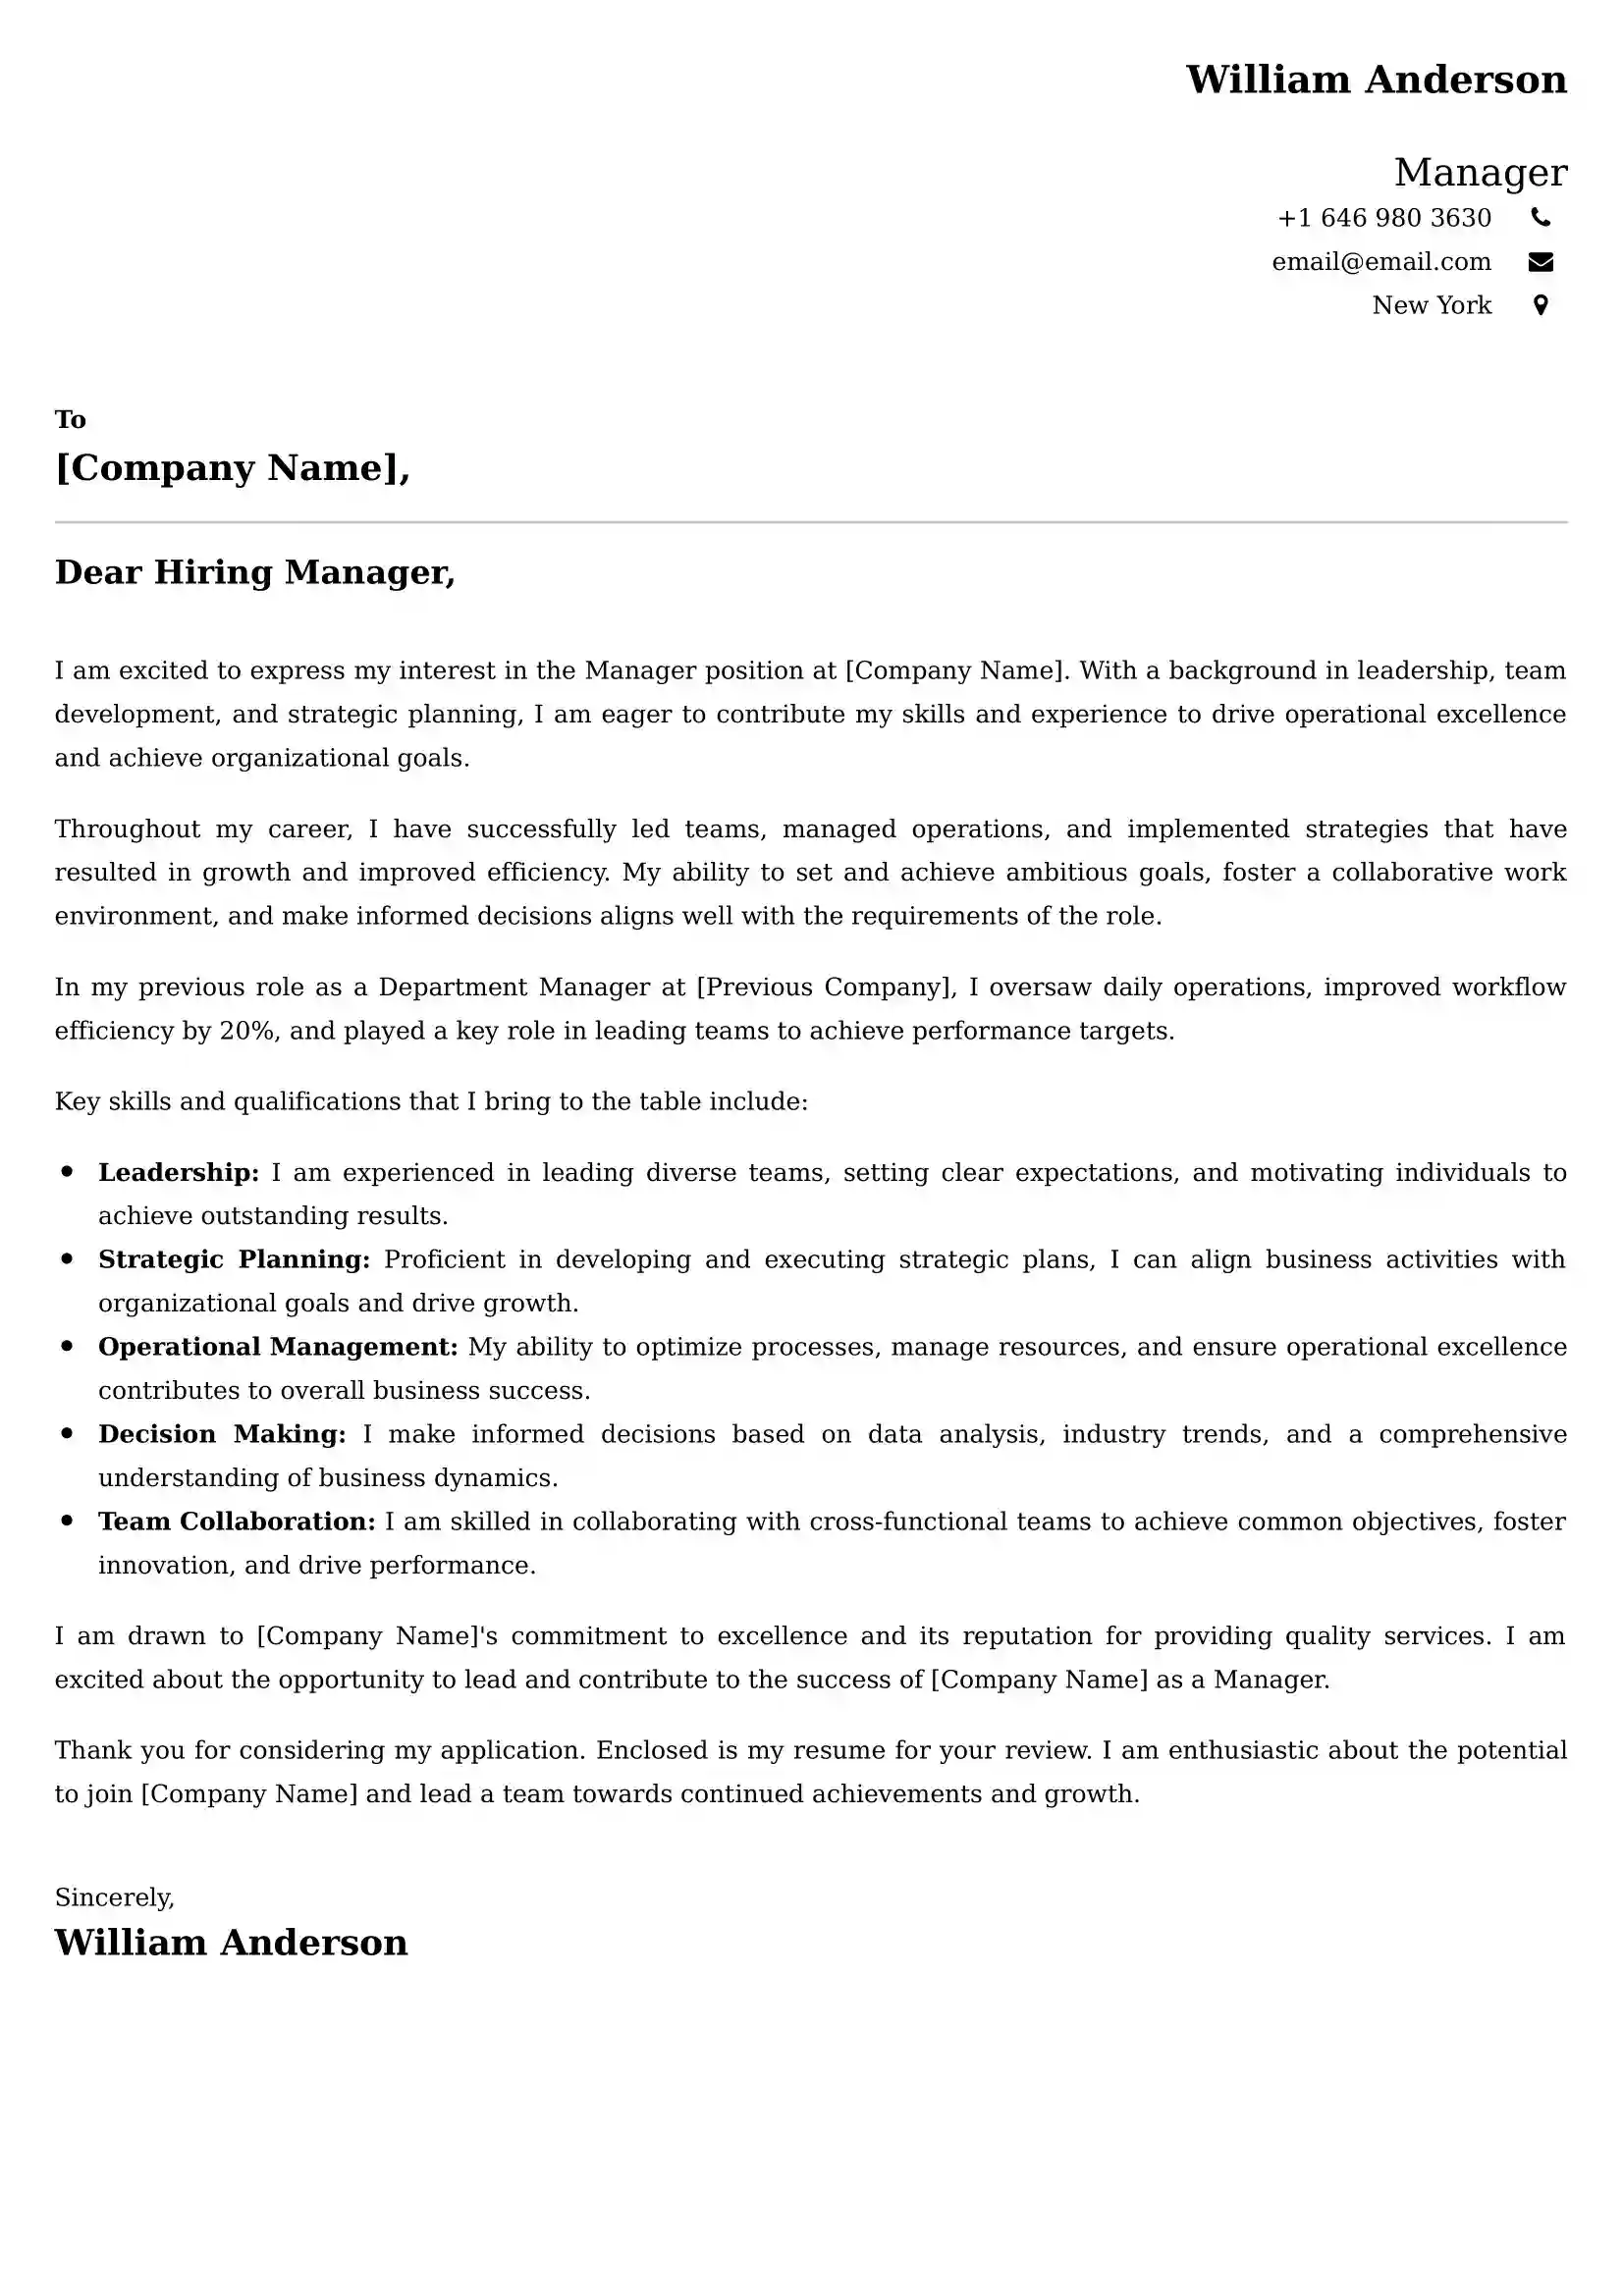 Manager Cover Letter Examples - US Format and Tips